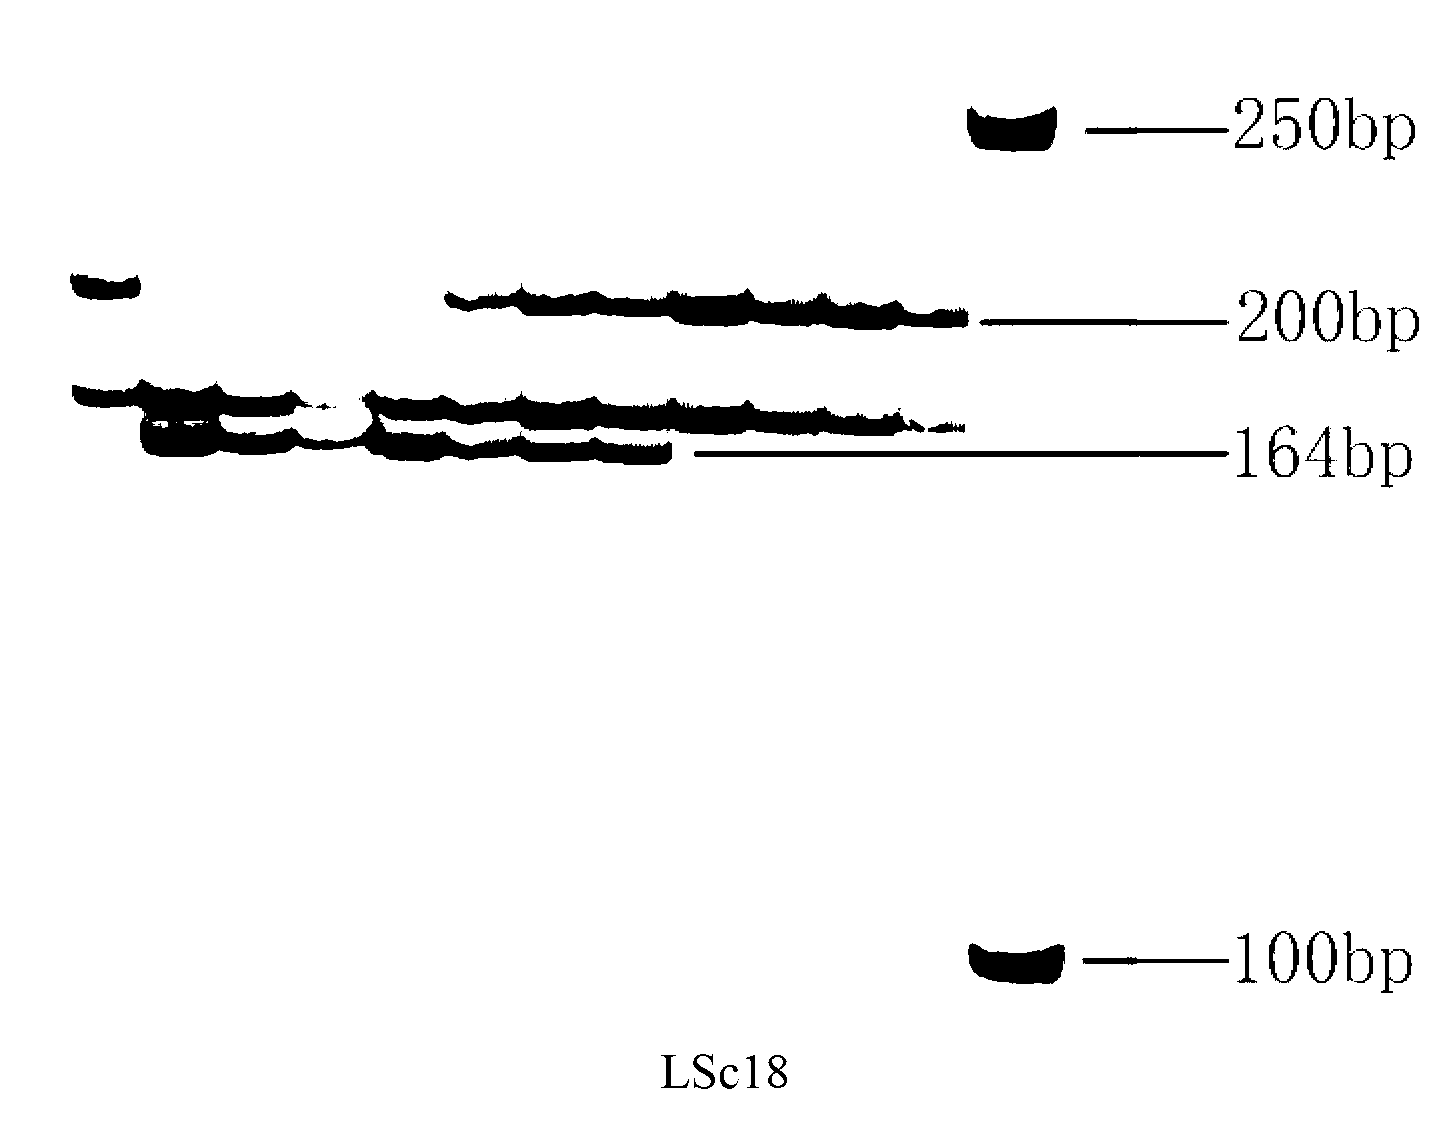 Wheat EST (expressed sequence tag) sequence, molecular marking for stripe rust-resistance property, and application